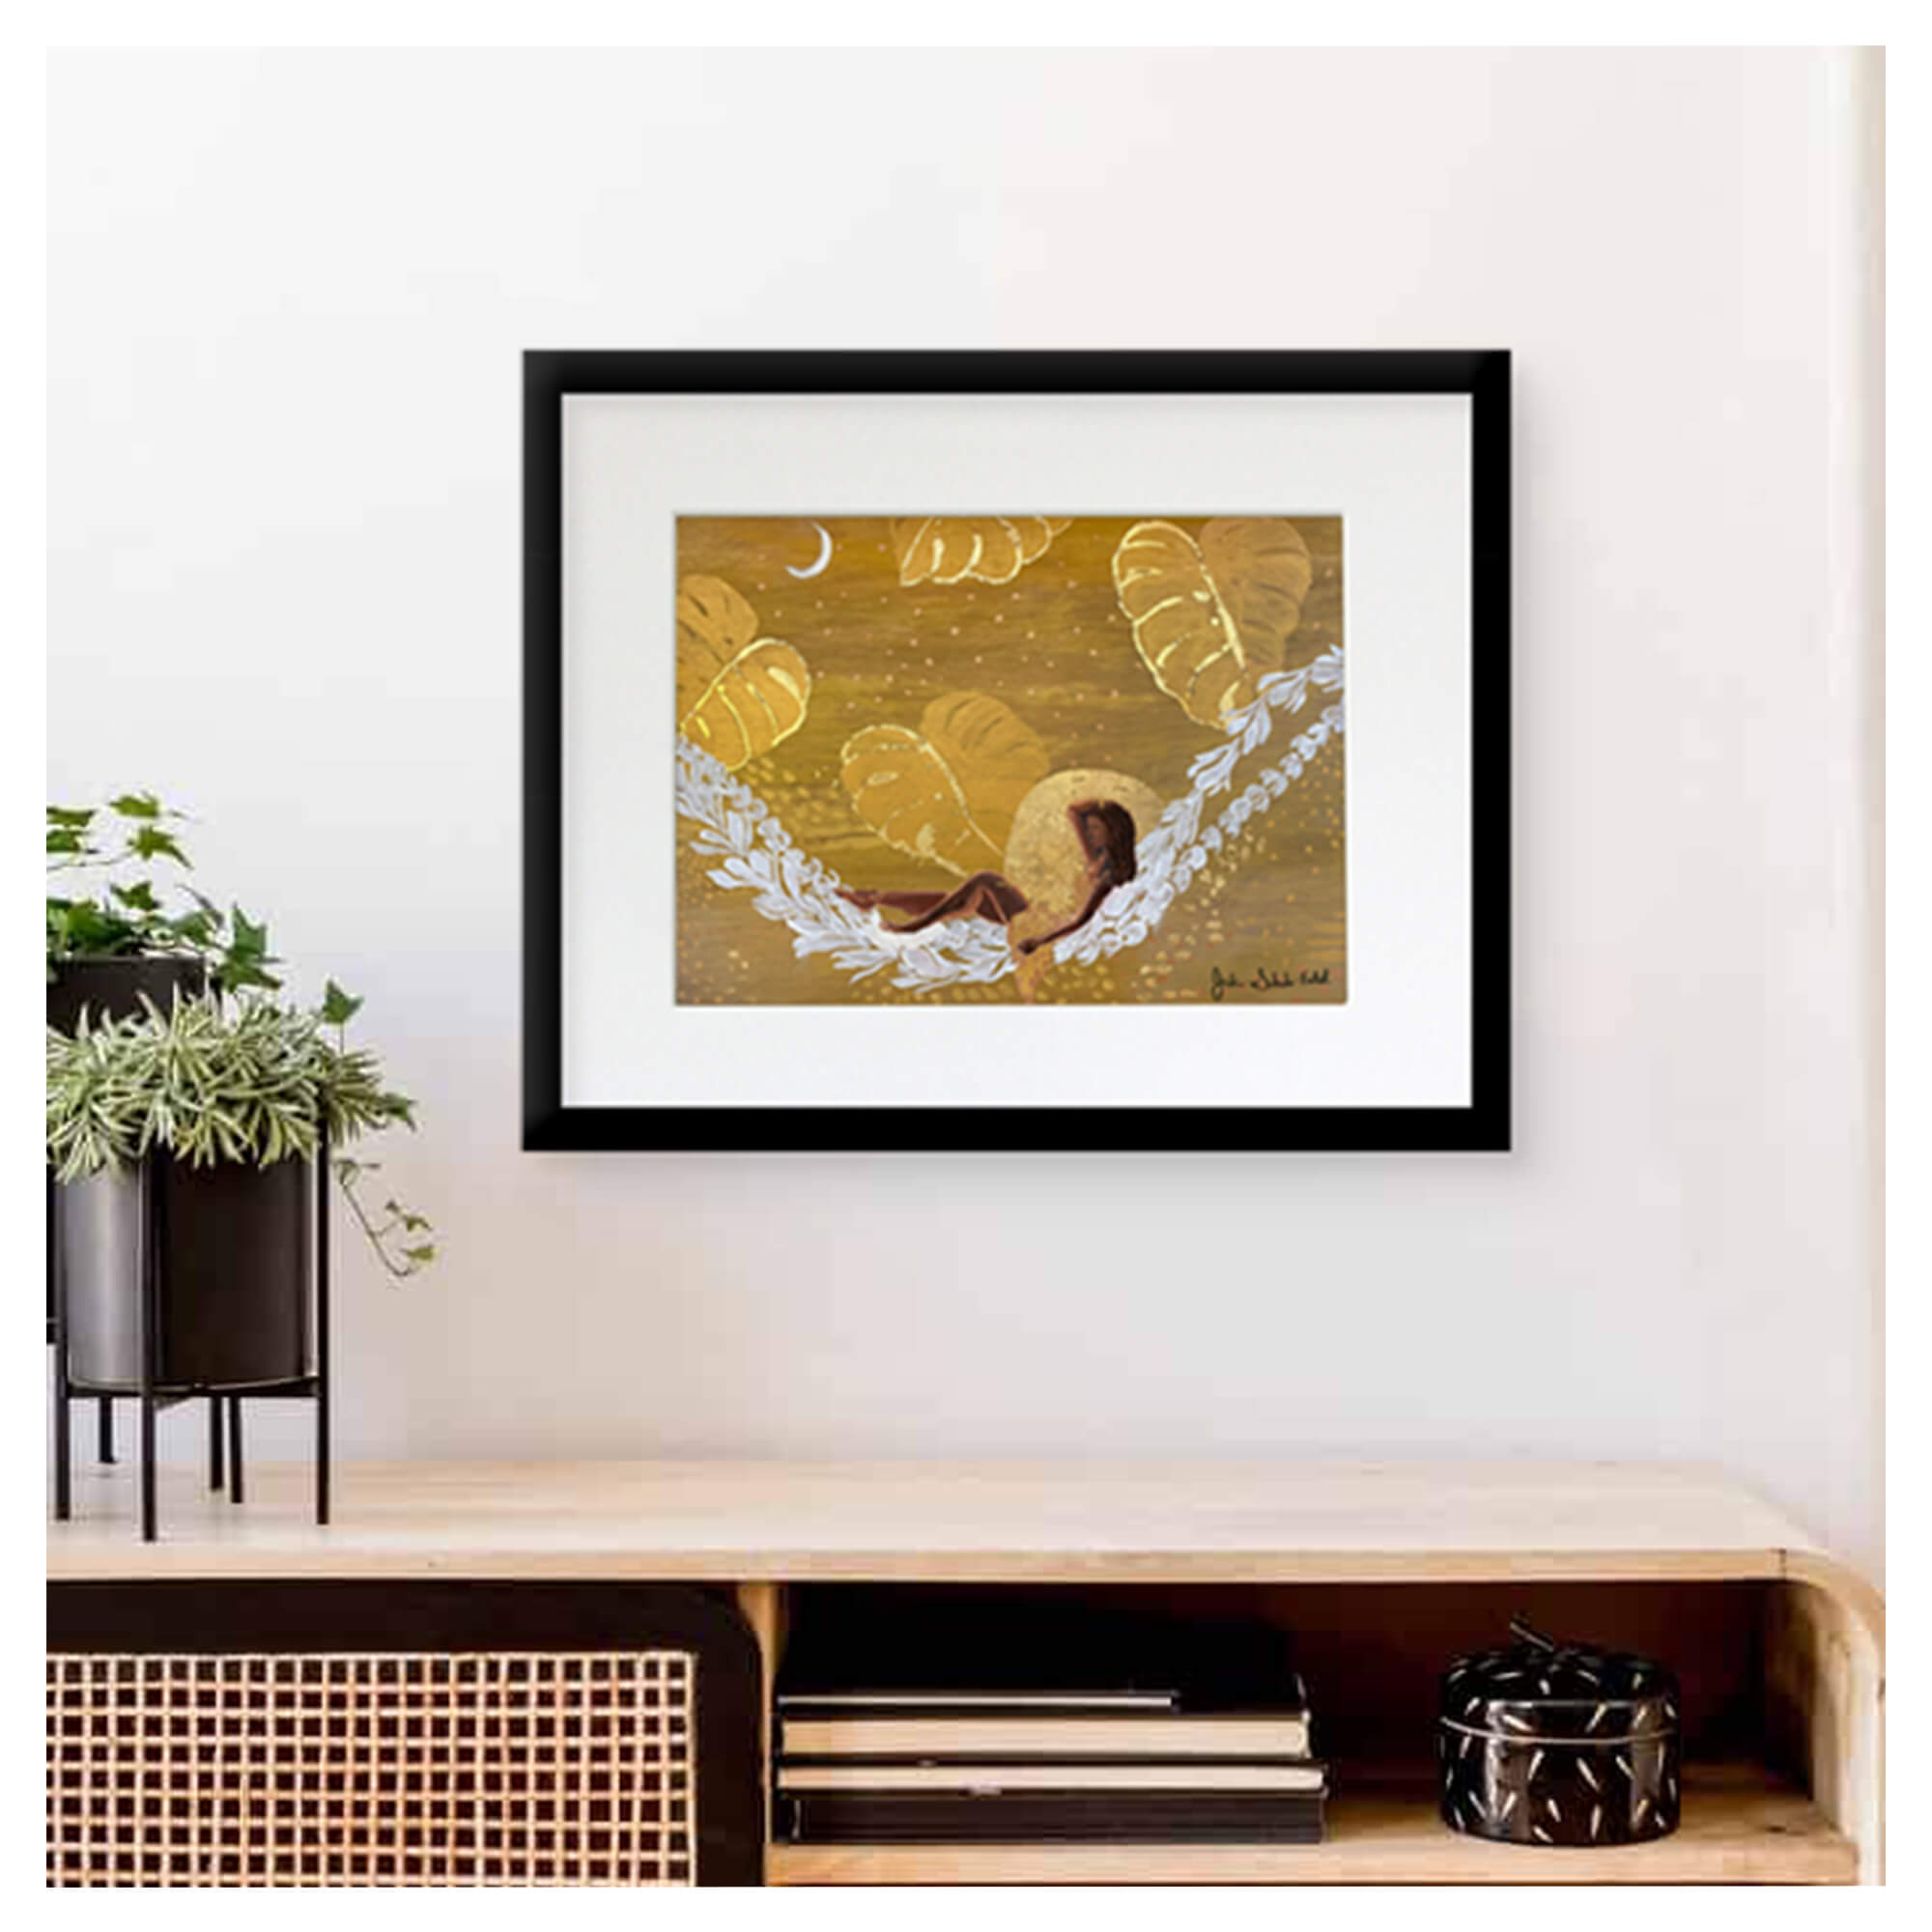 A framed matted art print featuring a woman relaxing on a lei hammock with monstera leaves backdrop and some gold touchups by Hawaii artist Jackie Eitel